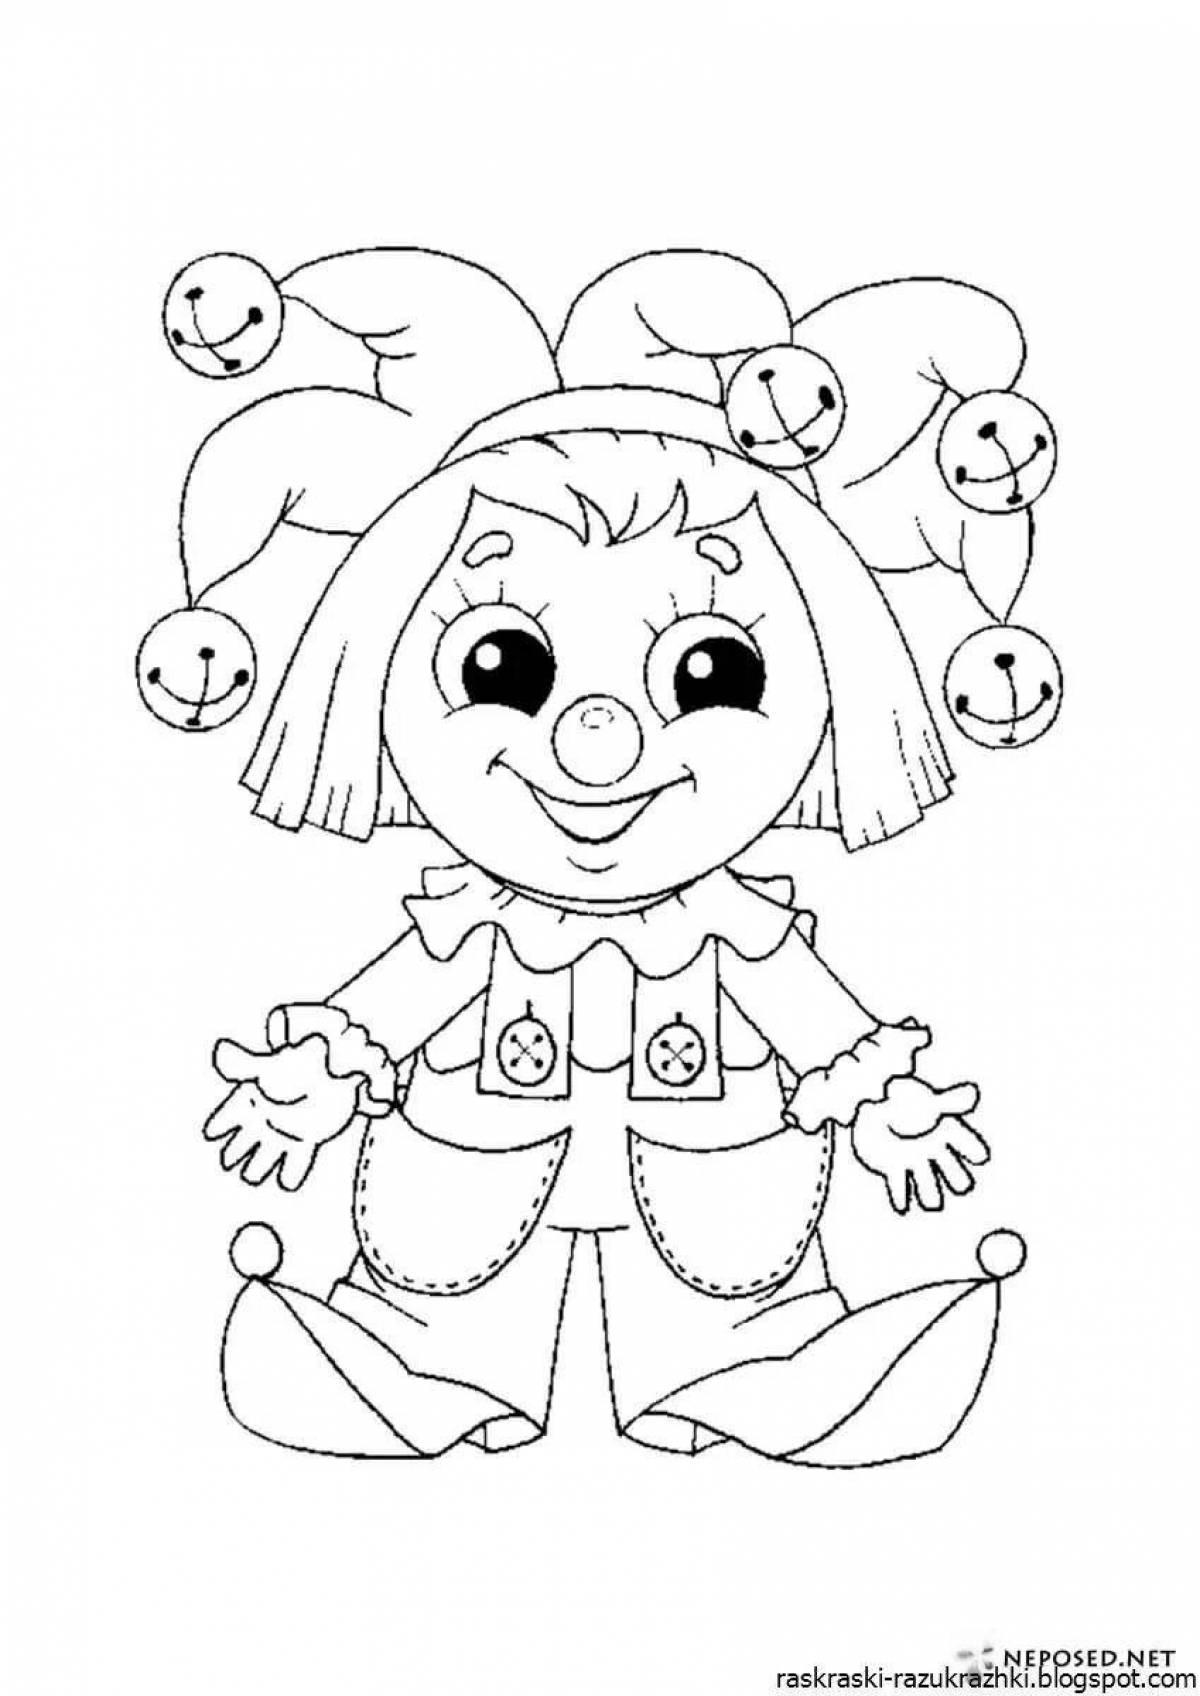 Coloring book funny parsley character